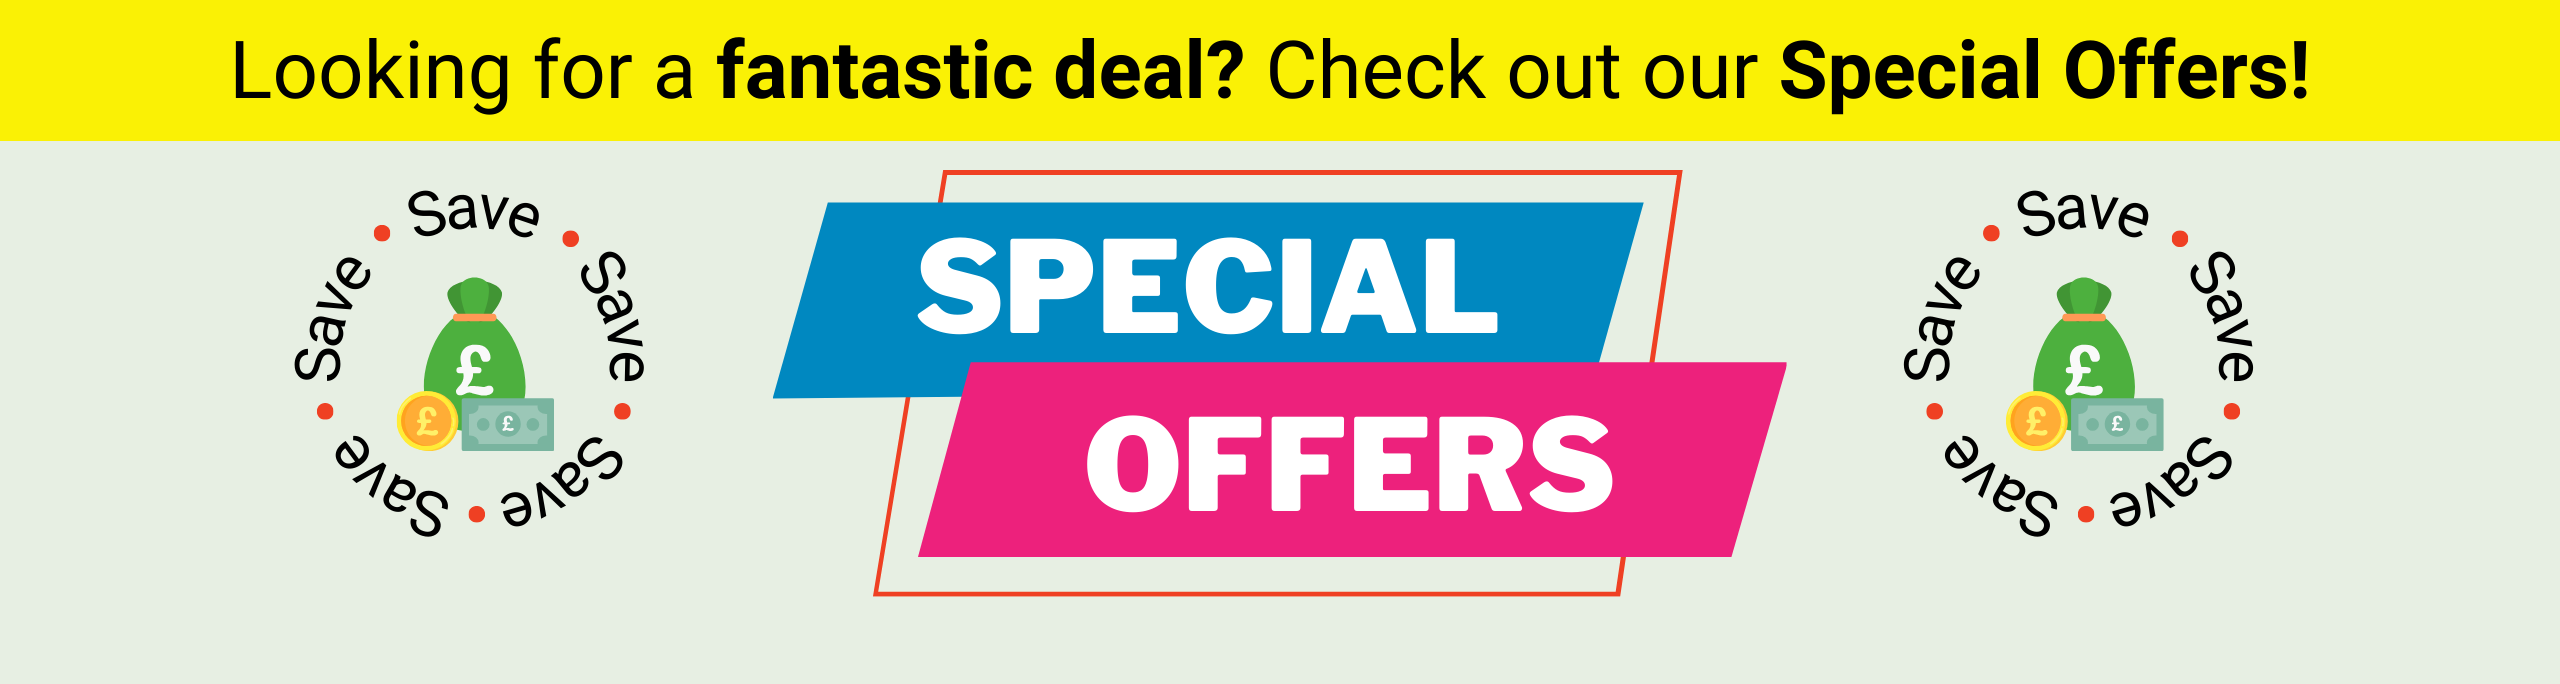 Looking for a fantastic deal? Check out our Special Offers!